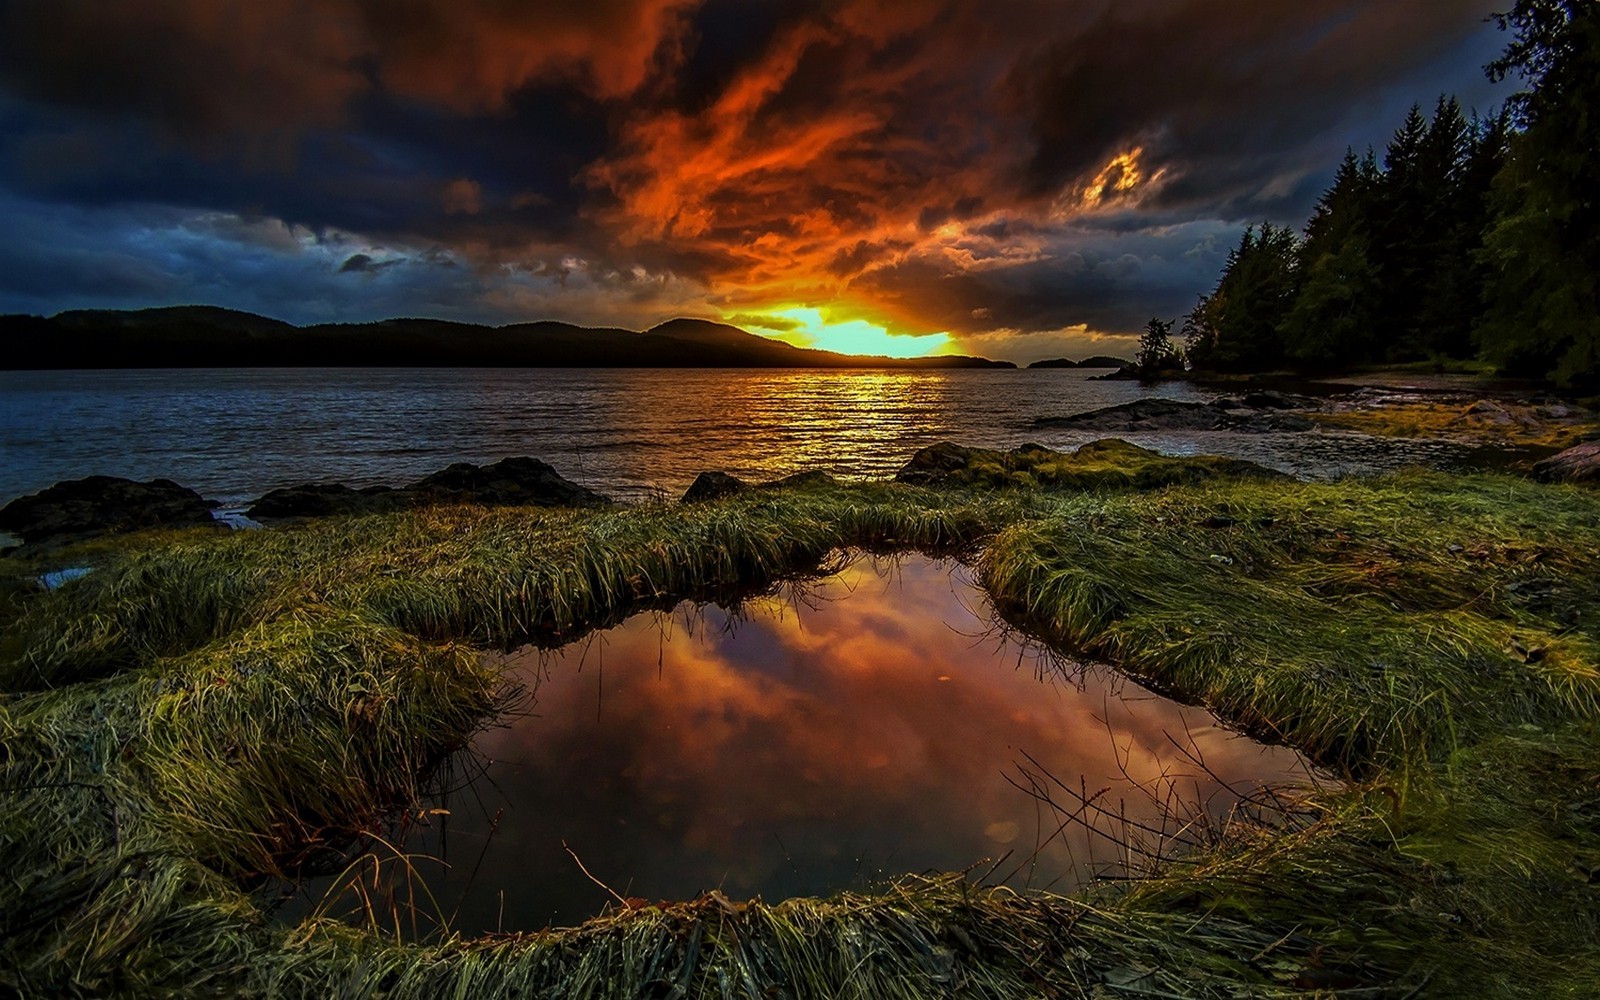 sunset, Grass, Trees, Puddle, Lake, Sky, Mountain, Nature, Landscape, Clouds, Water Wallpaper